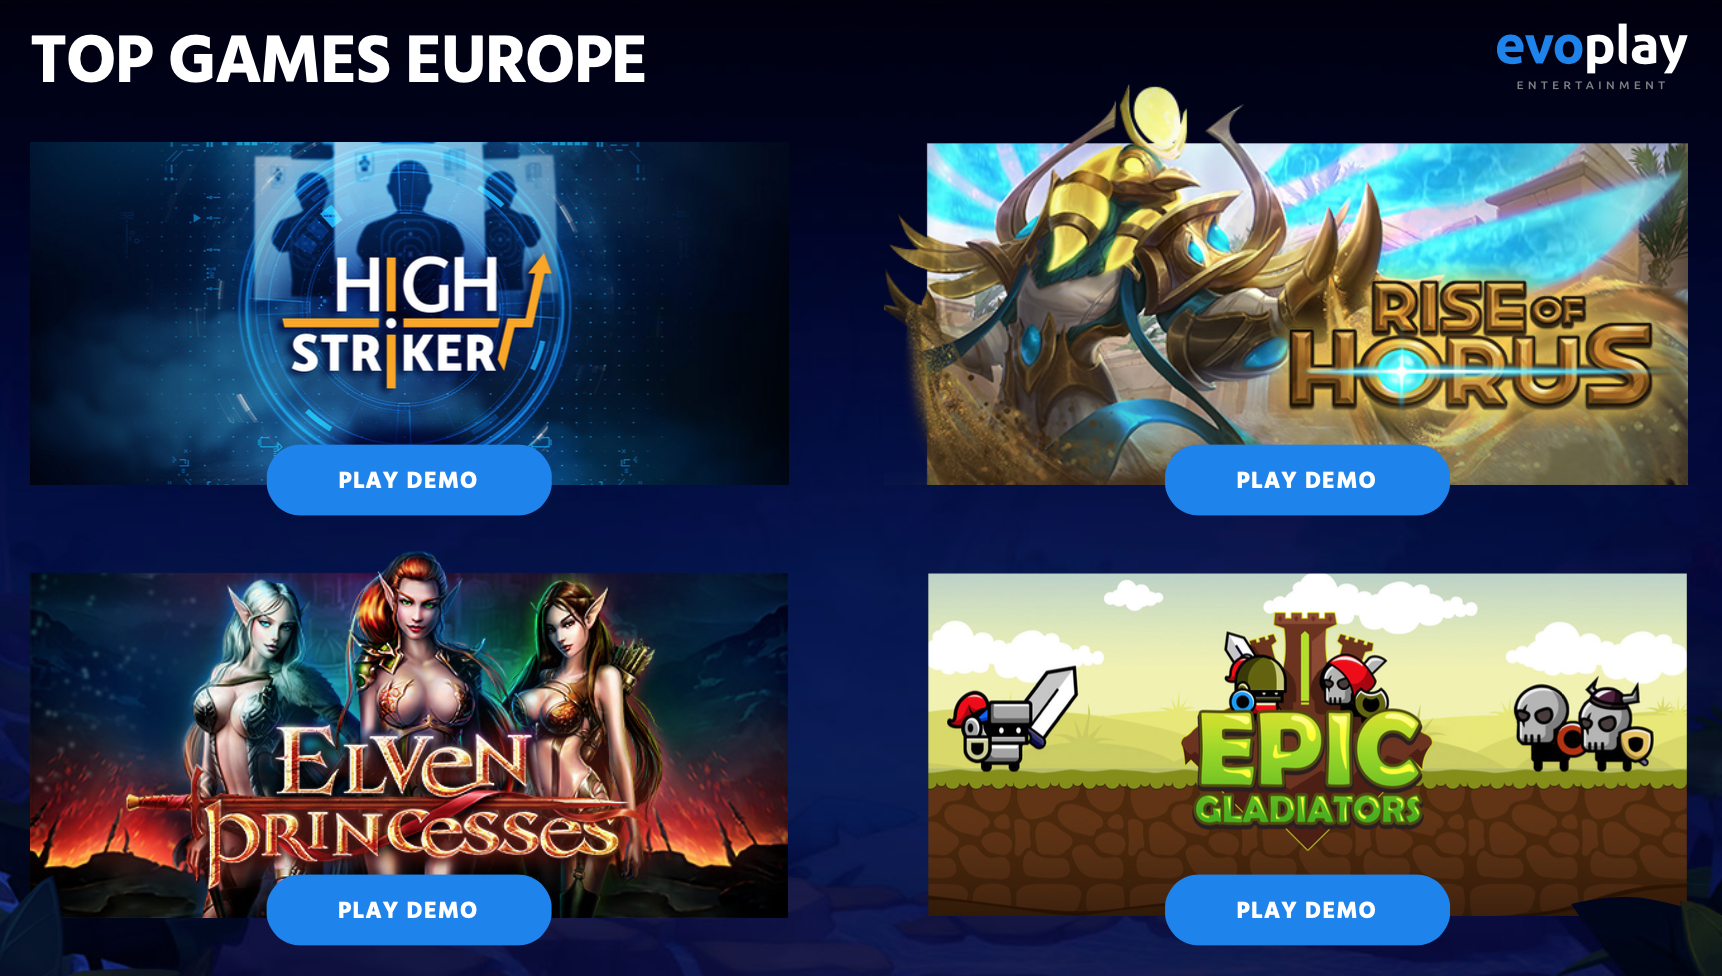 EvoPlay TOP GAMES EUROPE